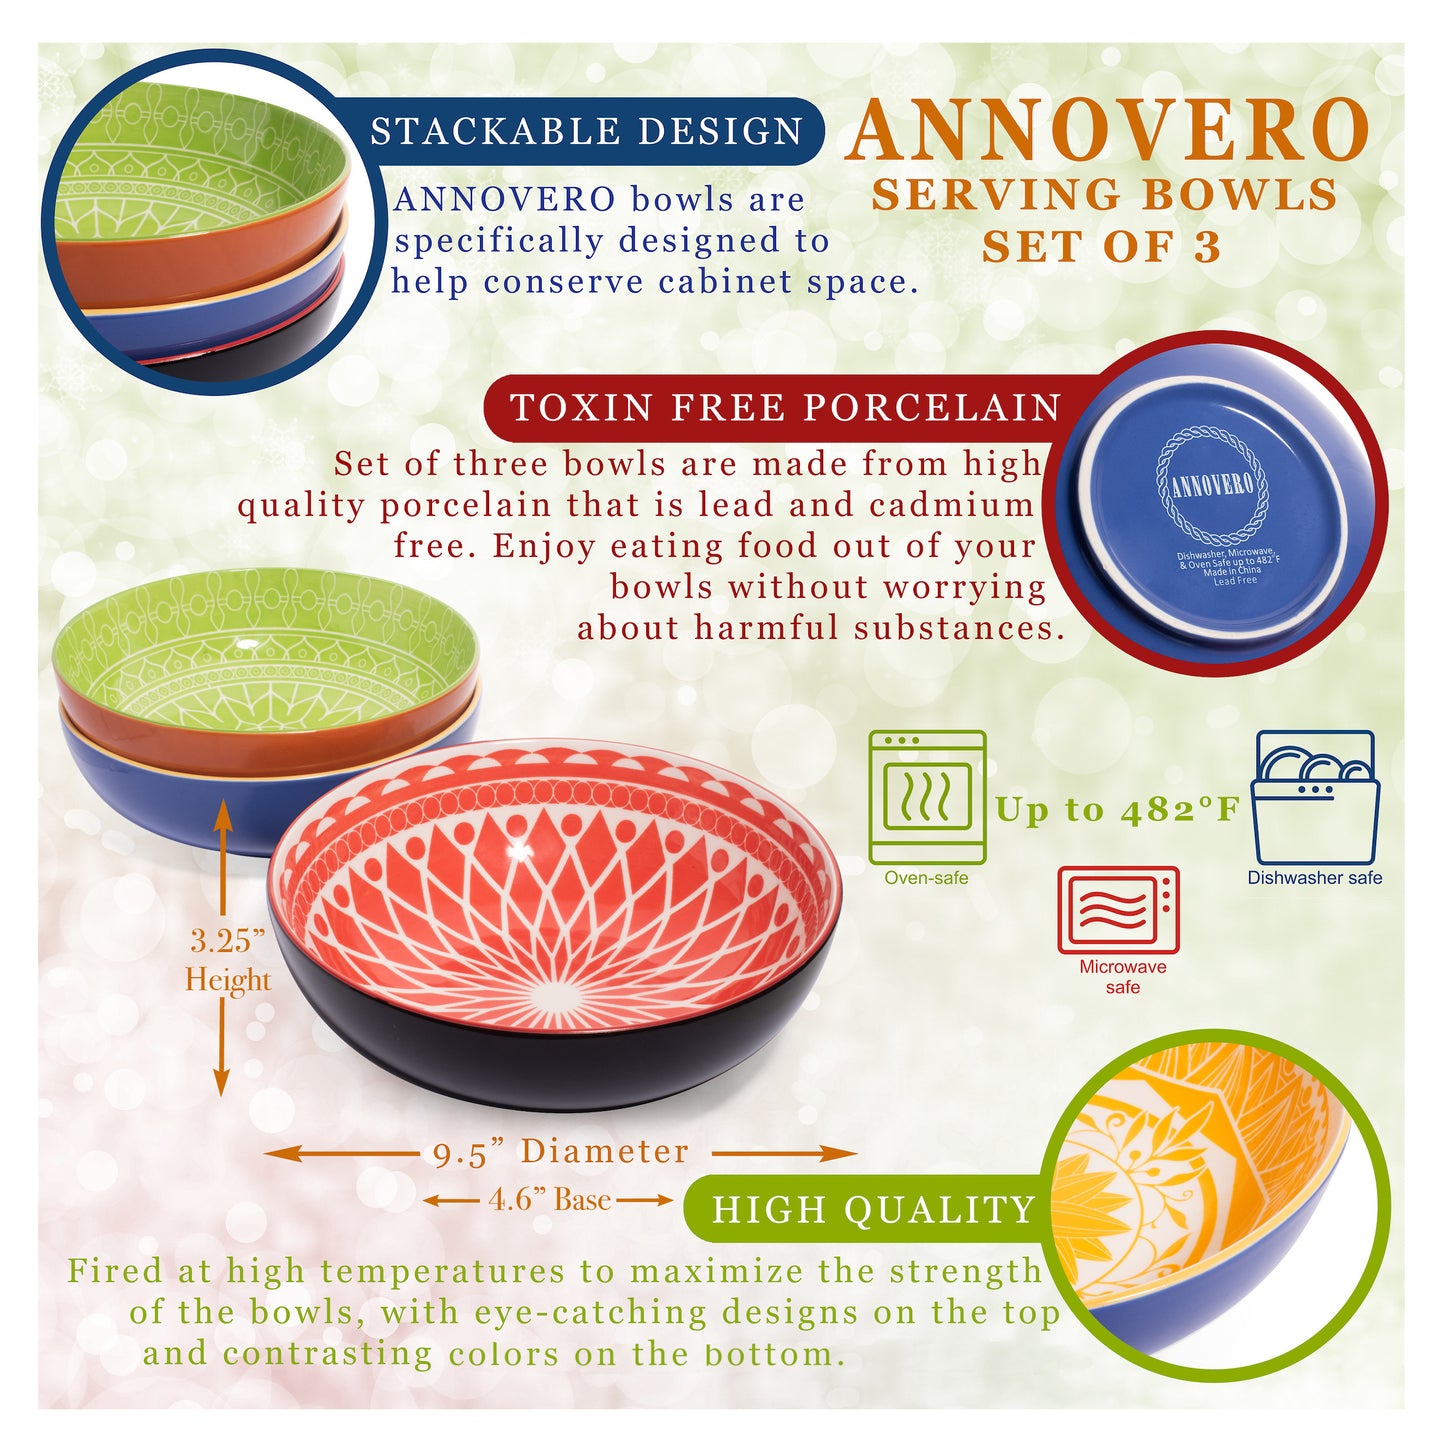 annovero serving bowls, set of 3 porcelain bowls, 9.5 inch diameter, 72 fluid ounce (9 cup) capacity